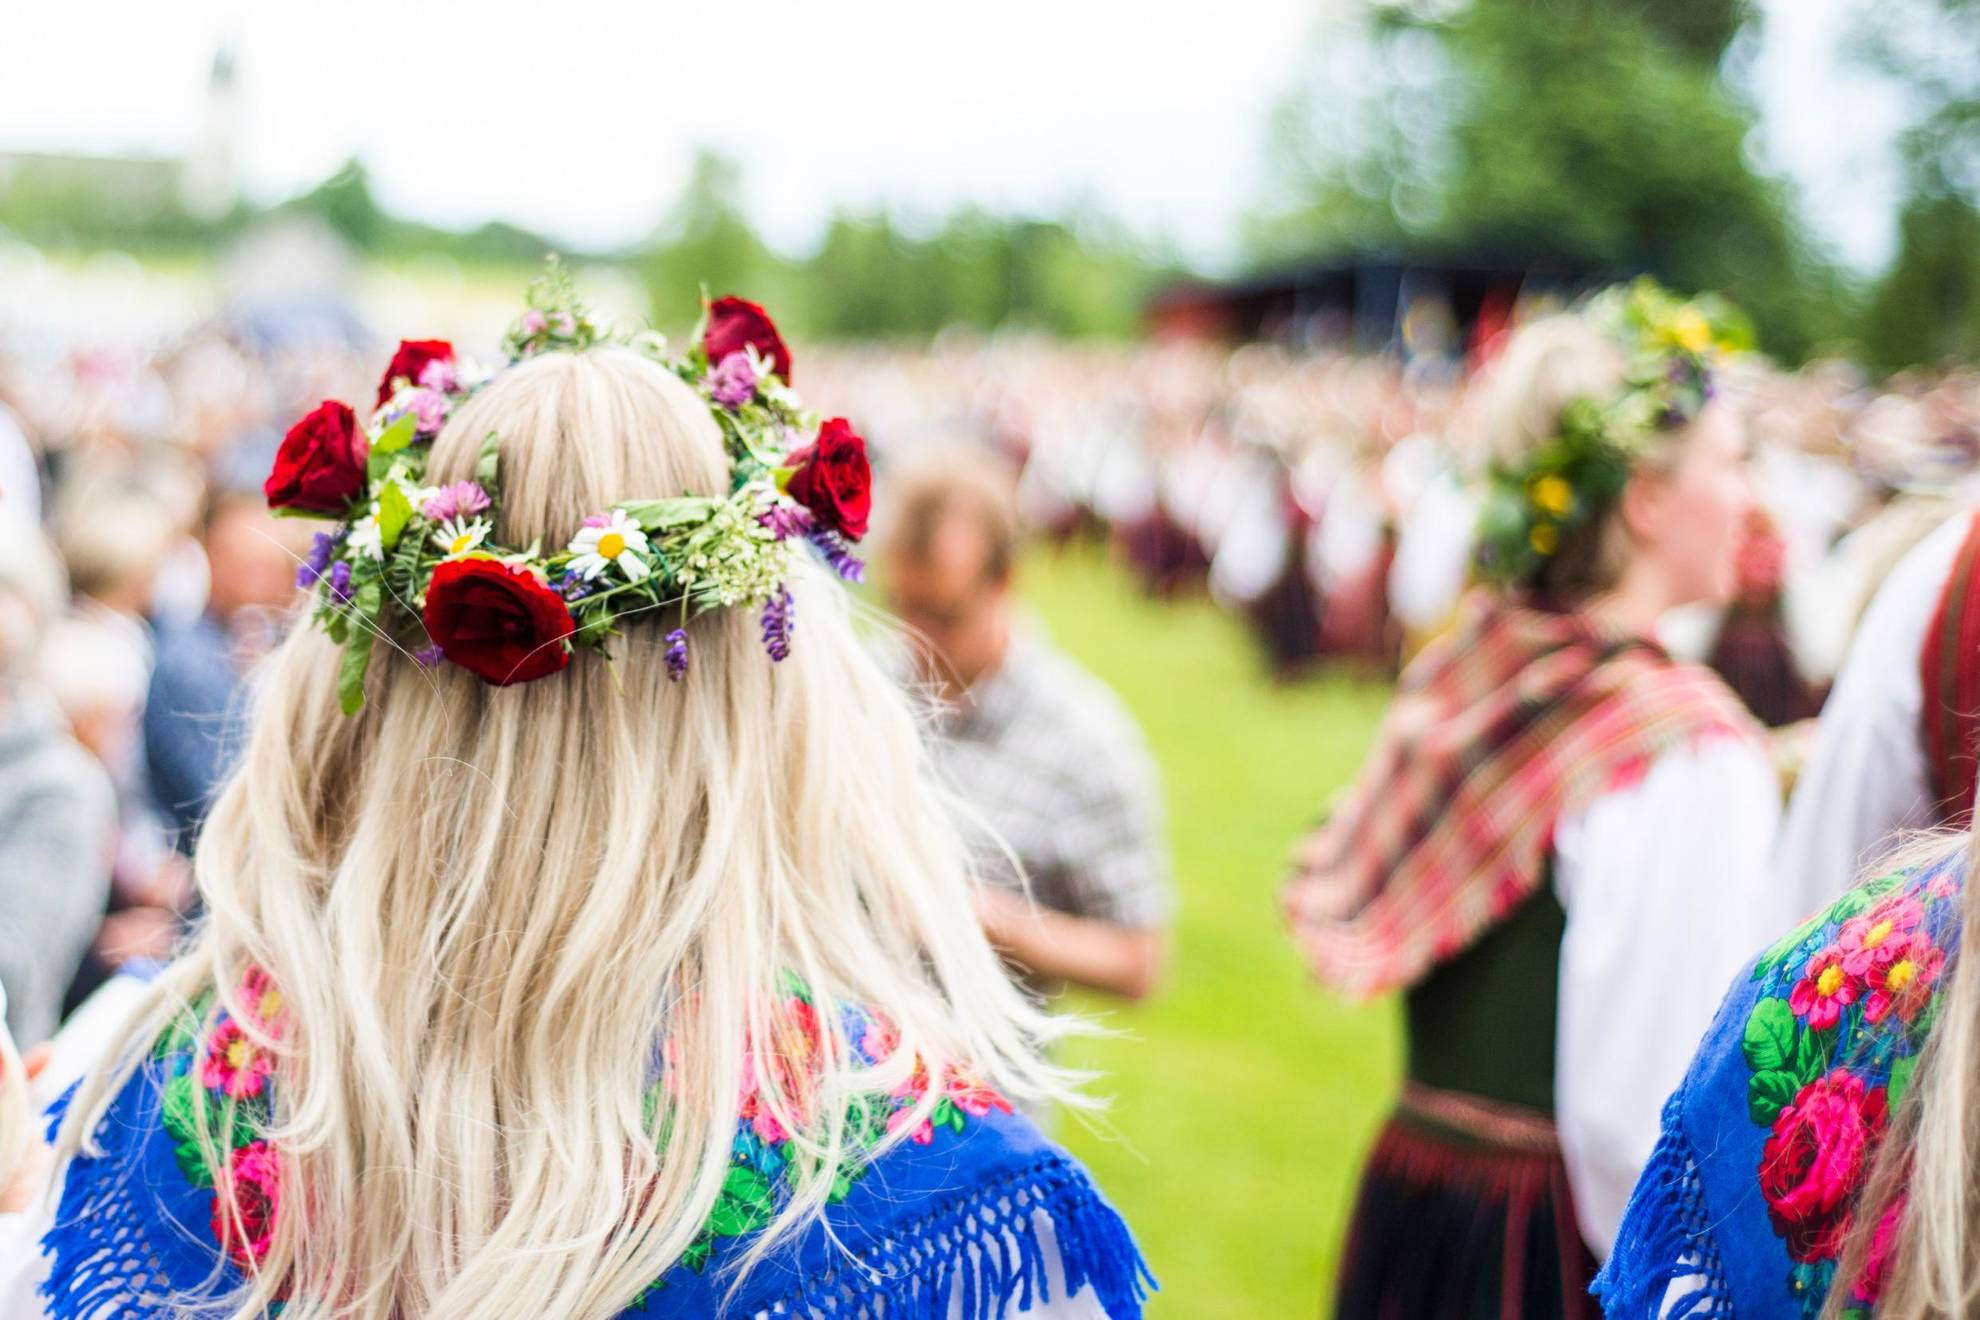 A crowd of people in Dalarna, some wearing Midsummer flower wreaths in their hair.